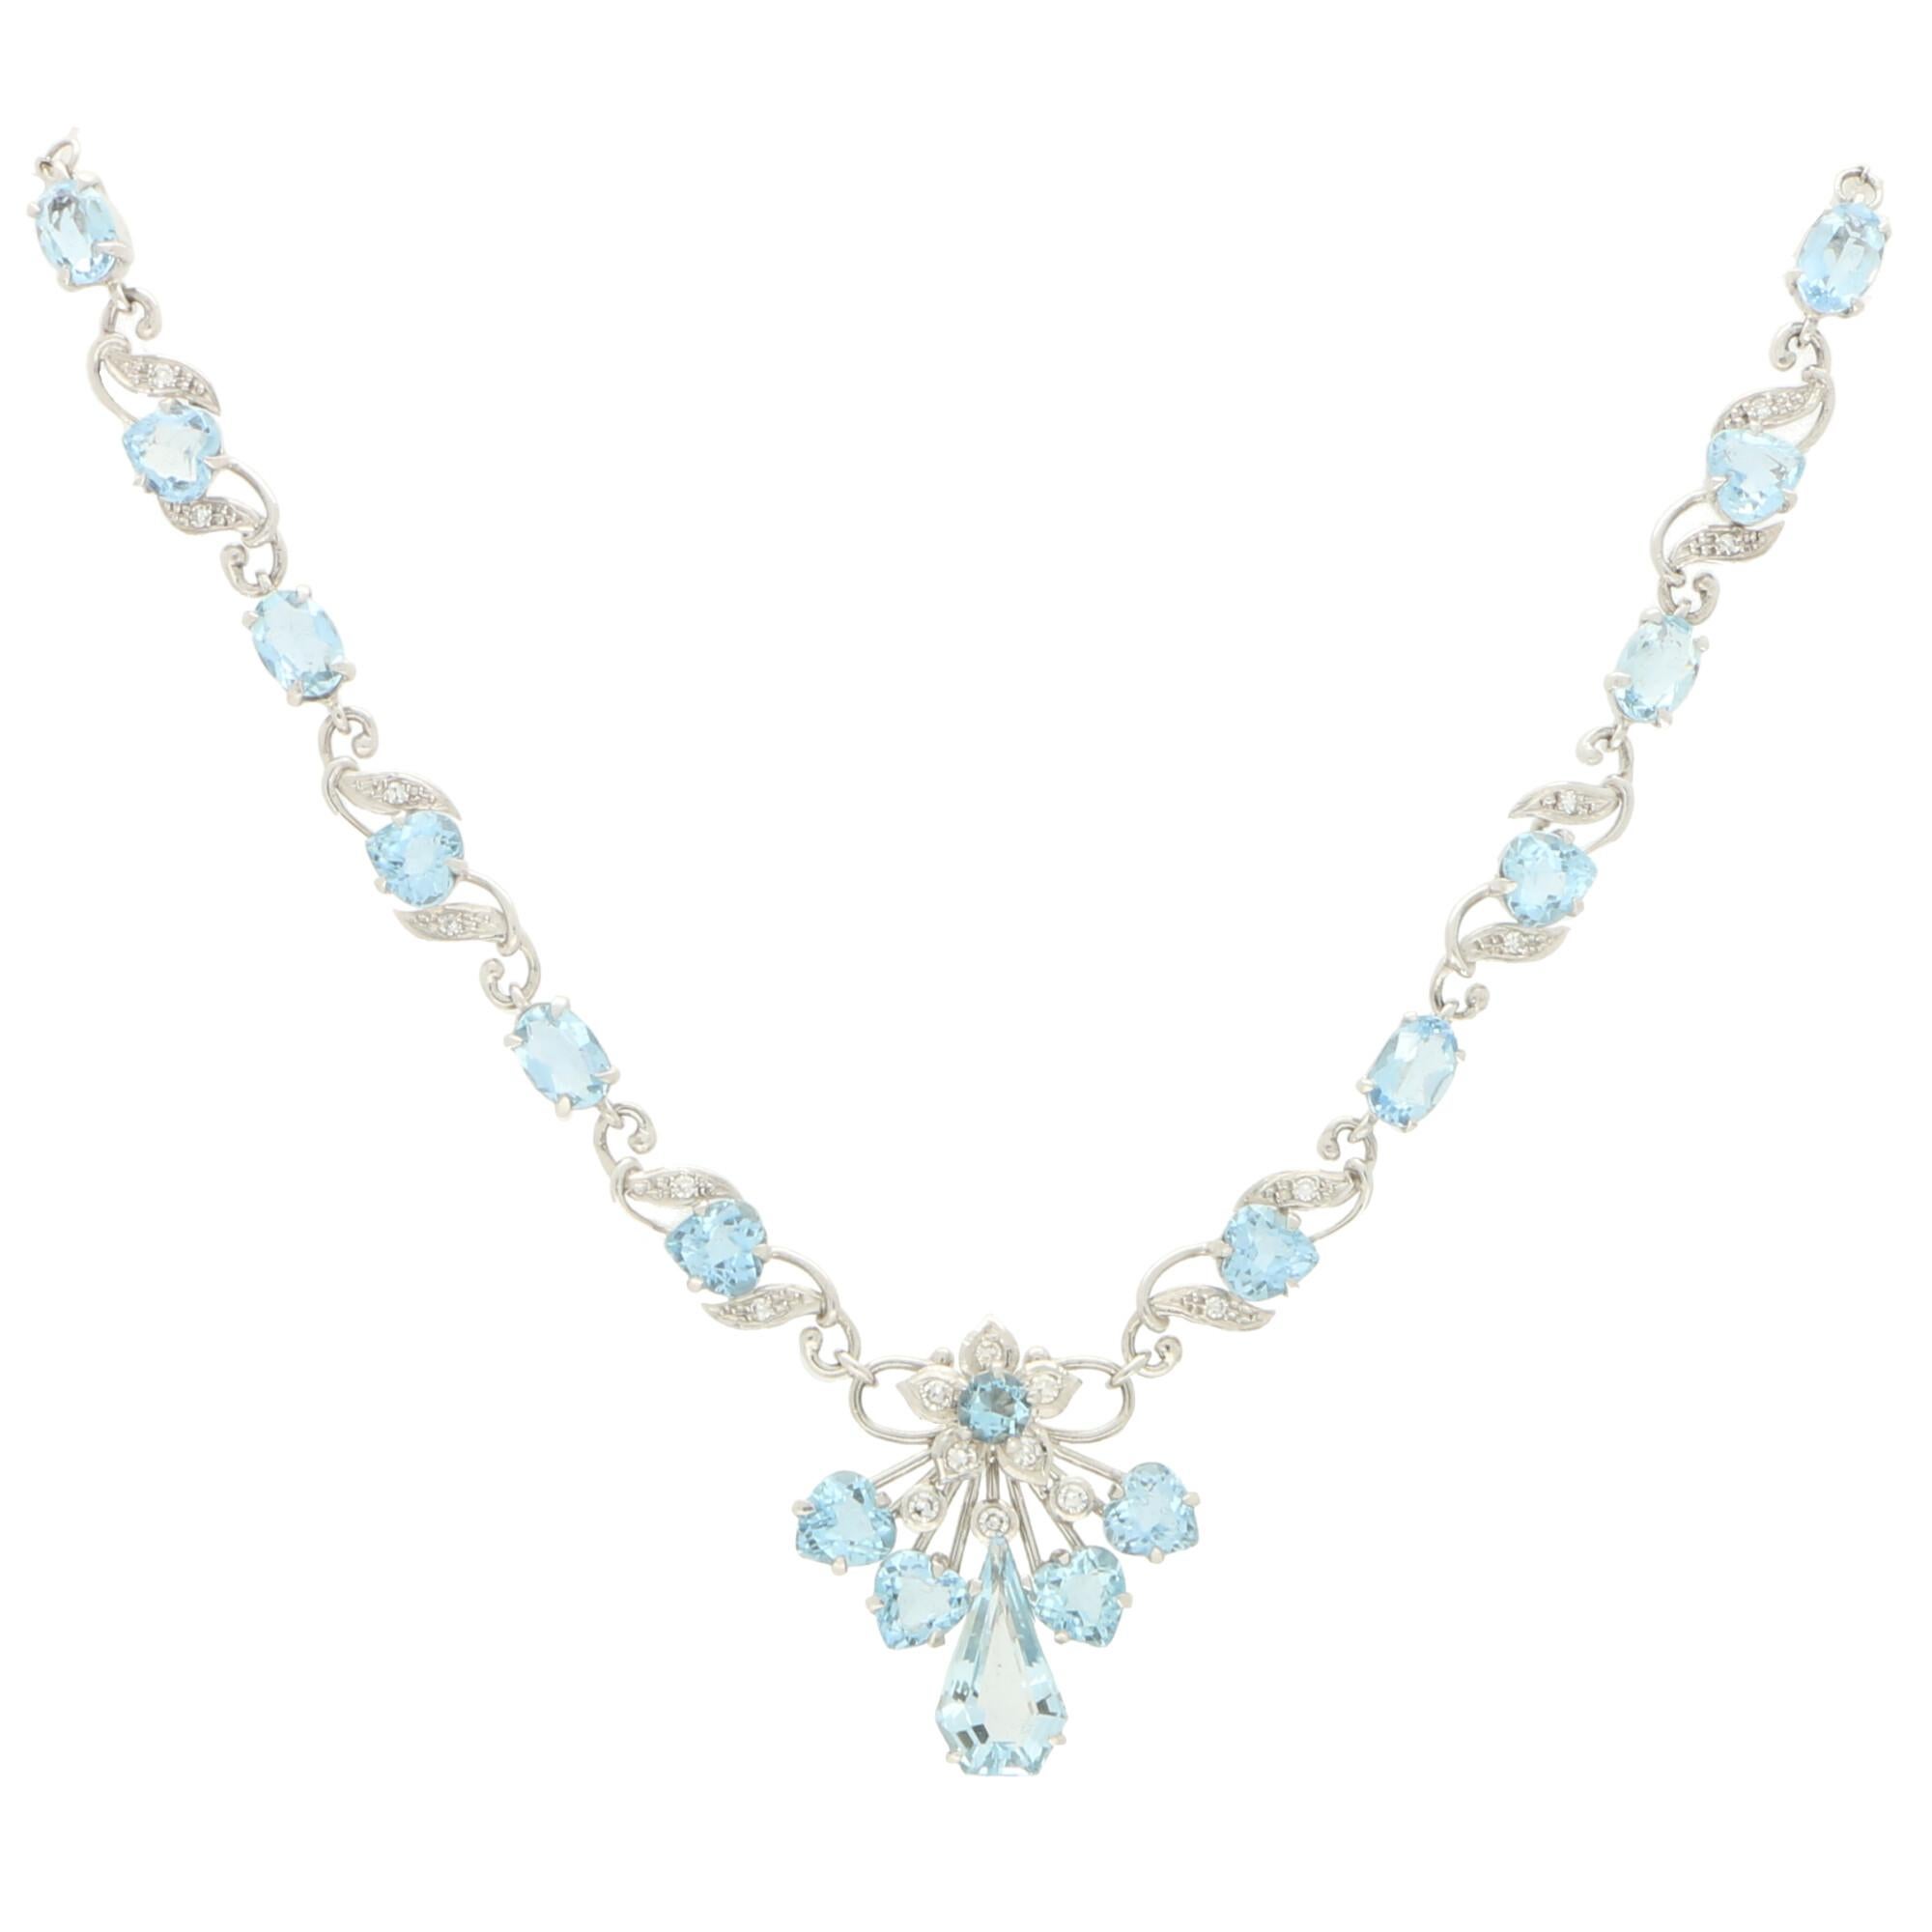 An elegant filigree aquamarine and diamond necklace set in 18k white gold. 

The focus is a spray of aquamarines set below a floral depiction on 18k white gold wirework. A centrally set shield cut aquamarine is shouldered with two heart shaped